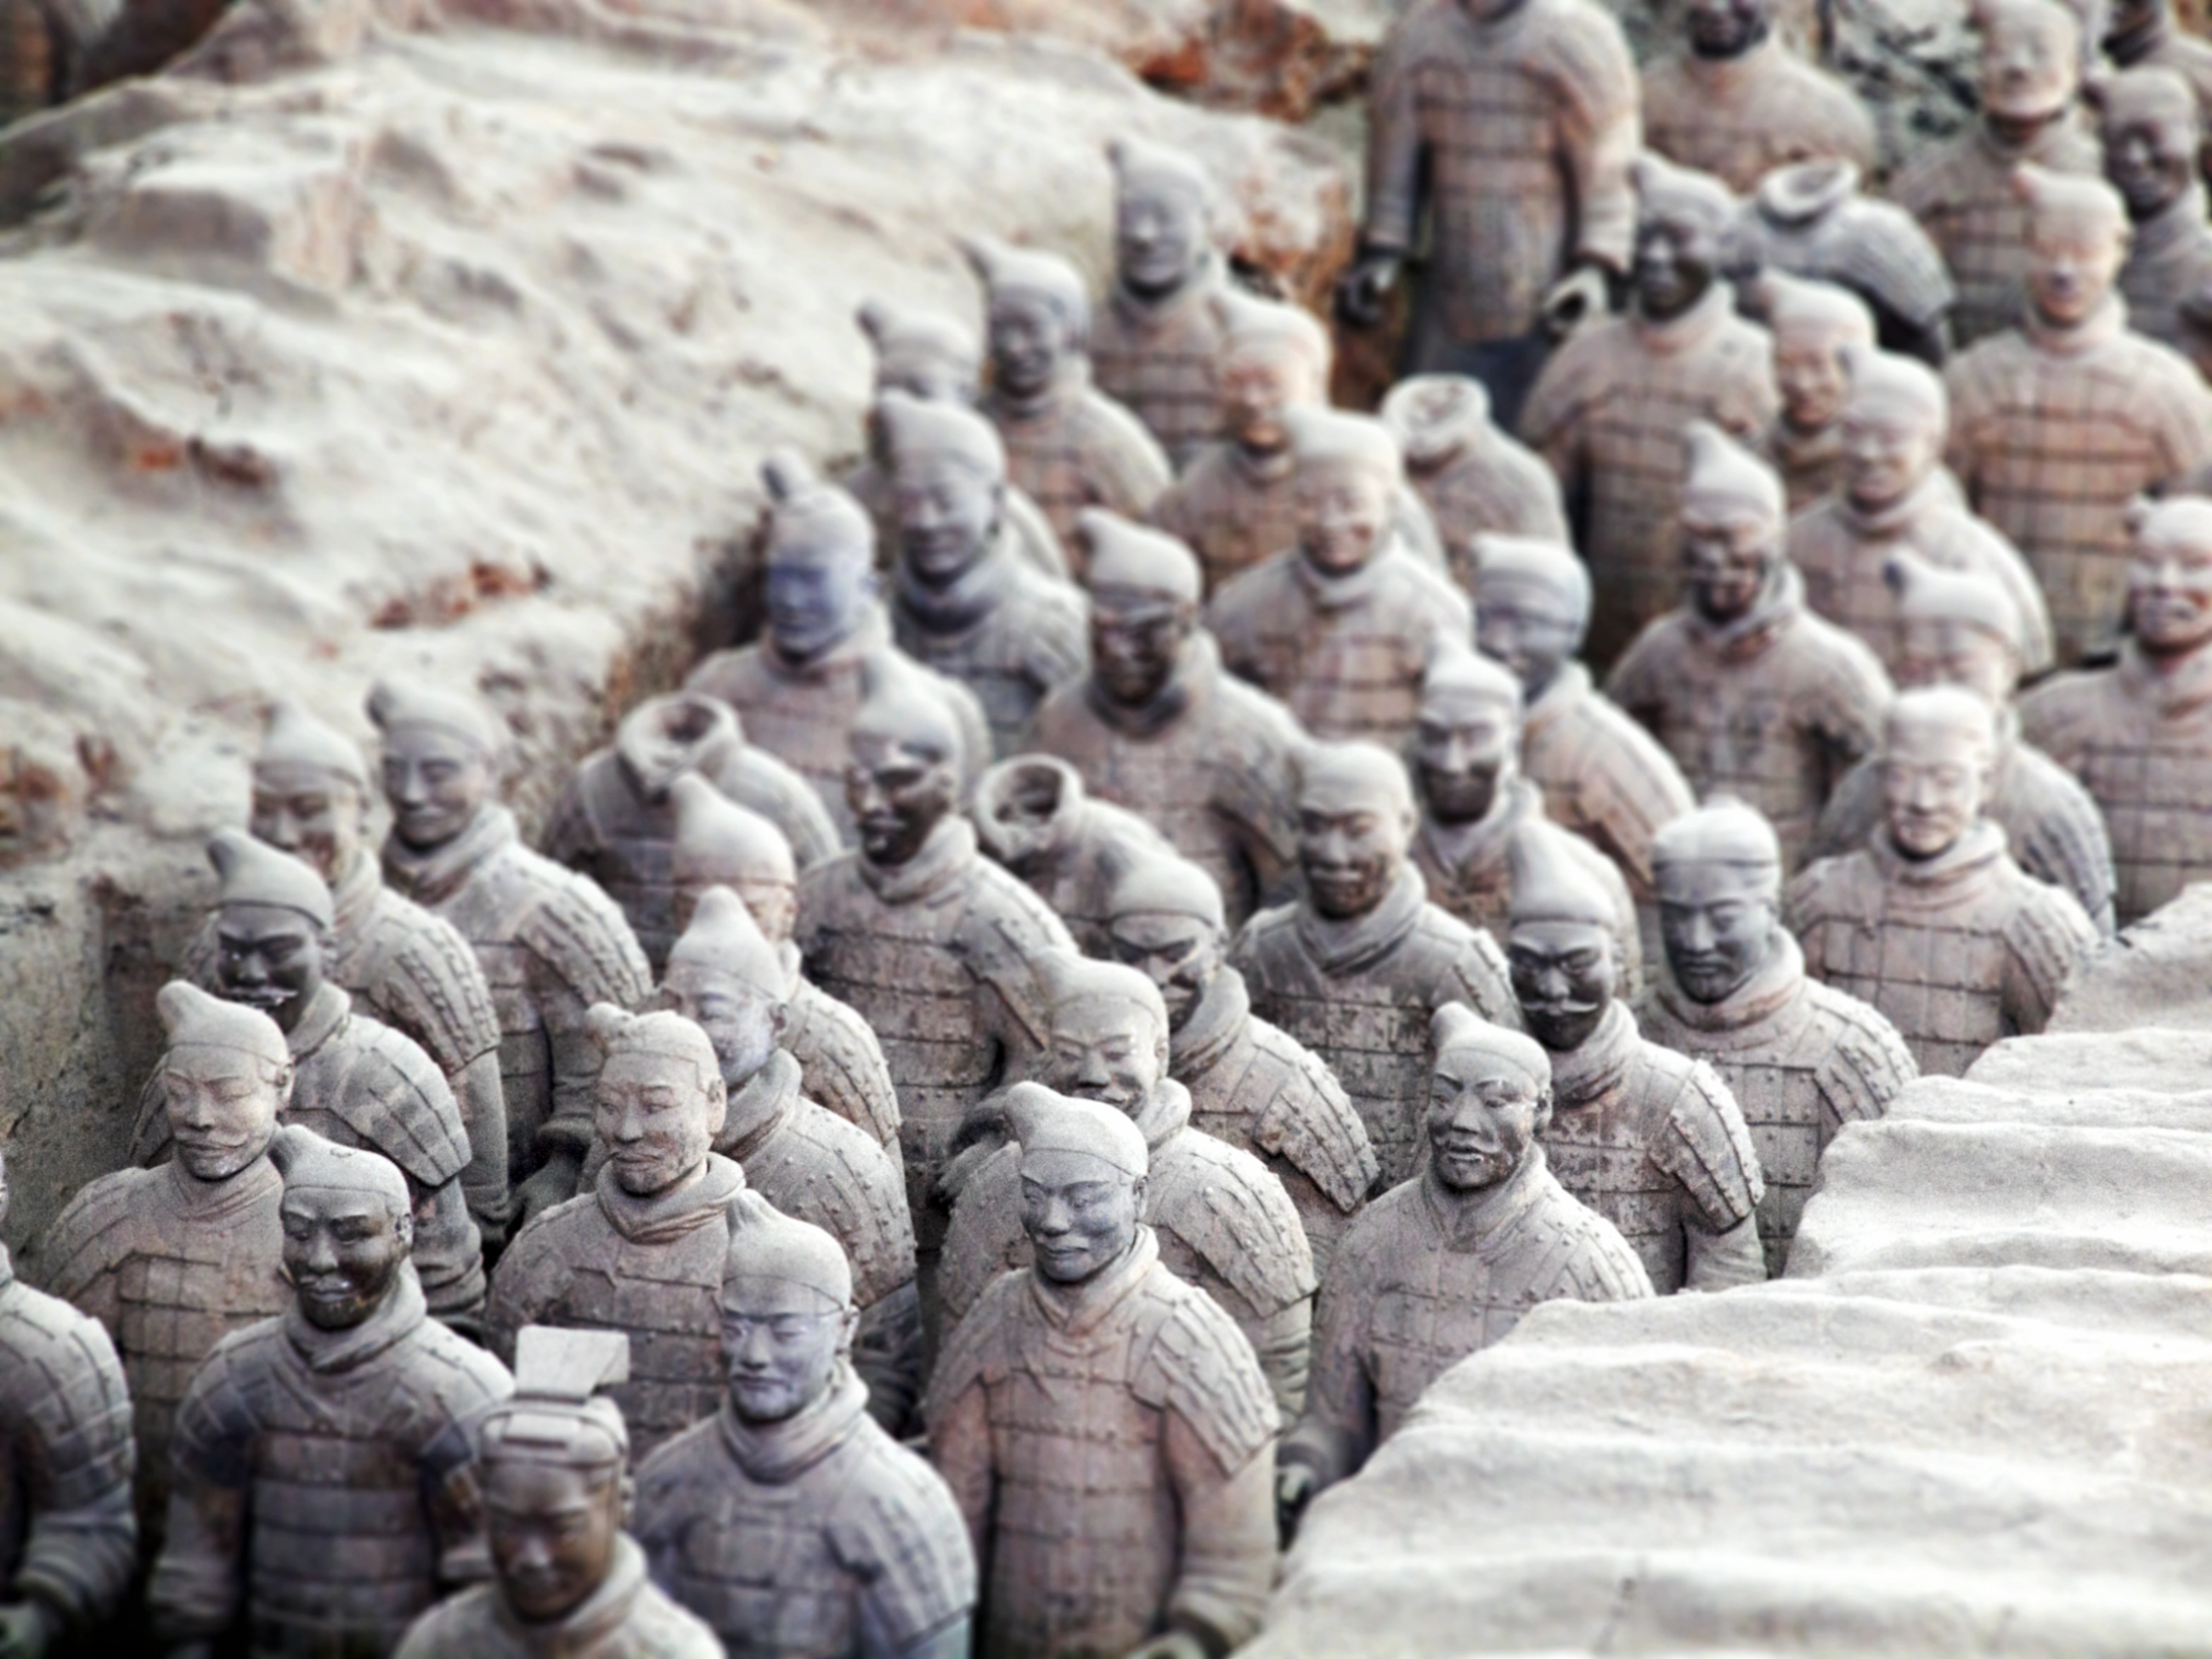 Terracotta Army in China